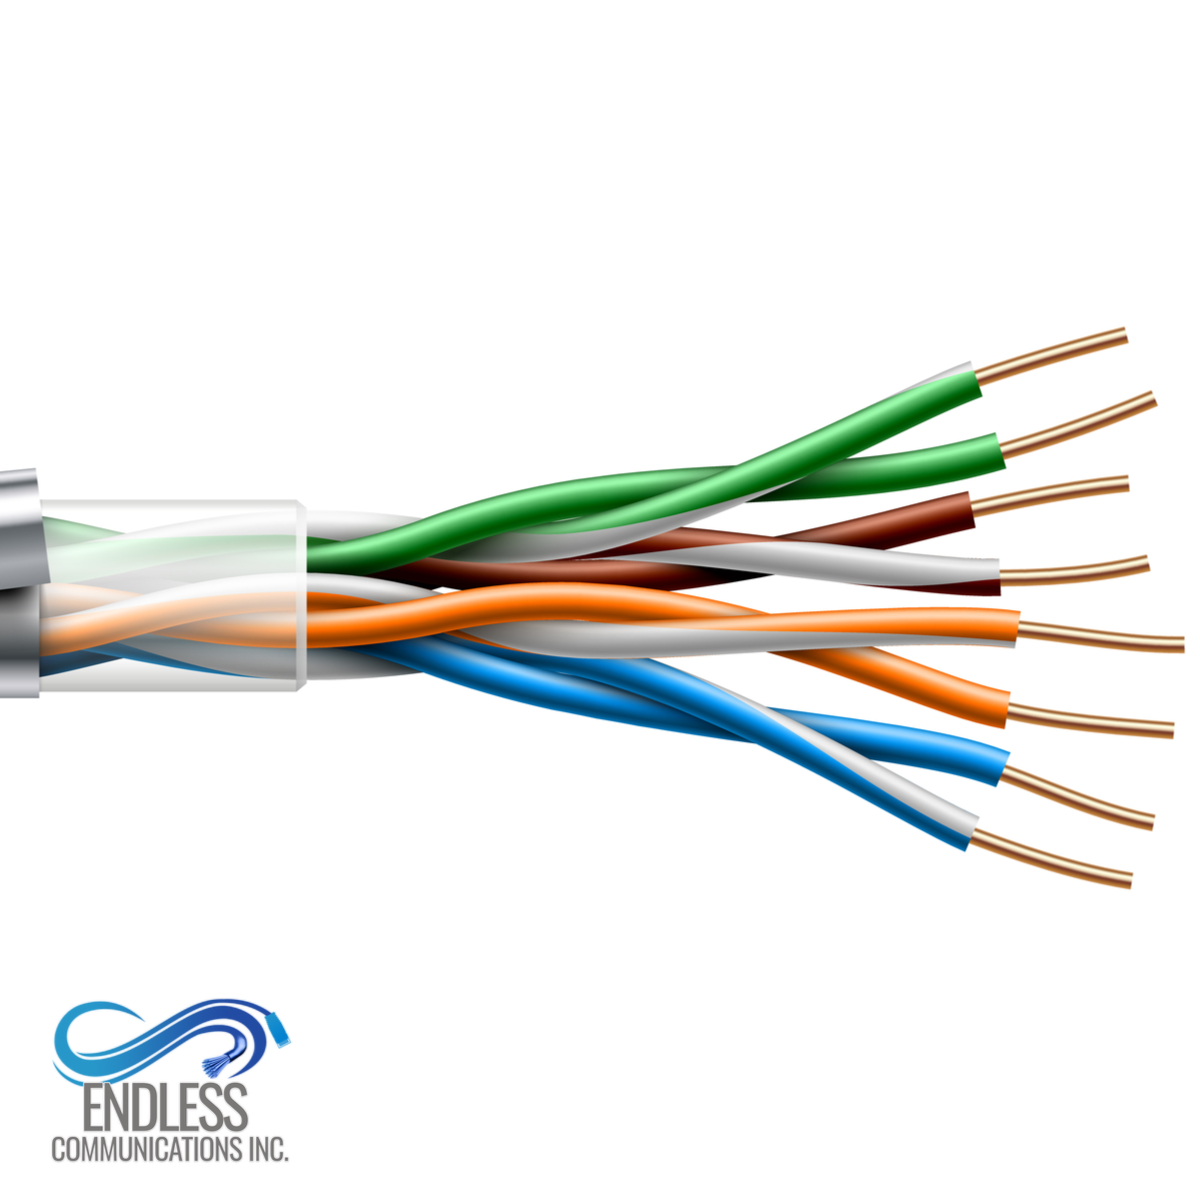 When Would Structured Cabling Come in Handy for Businesses in Buena Park?